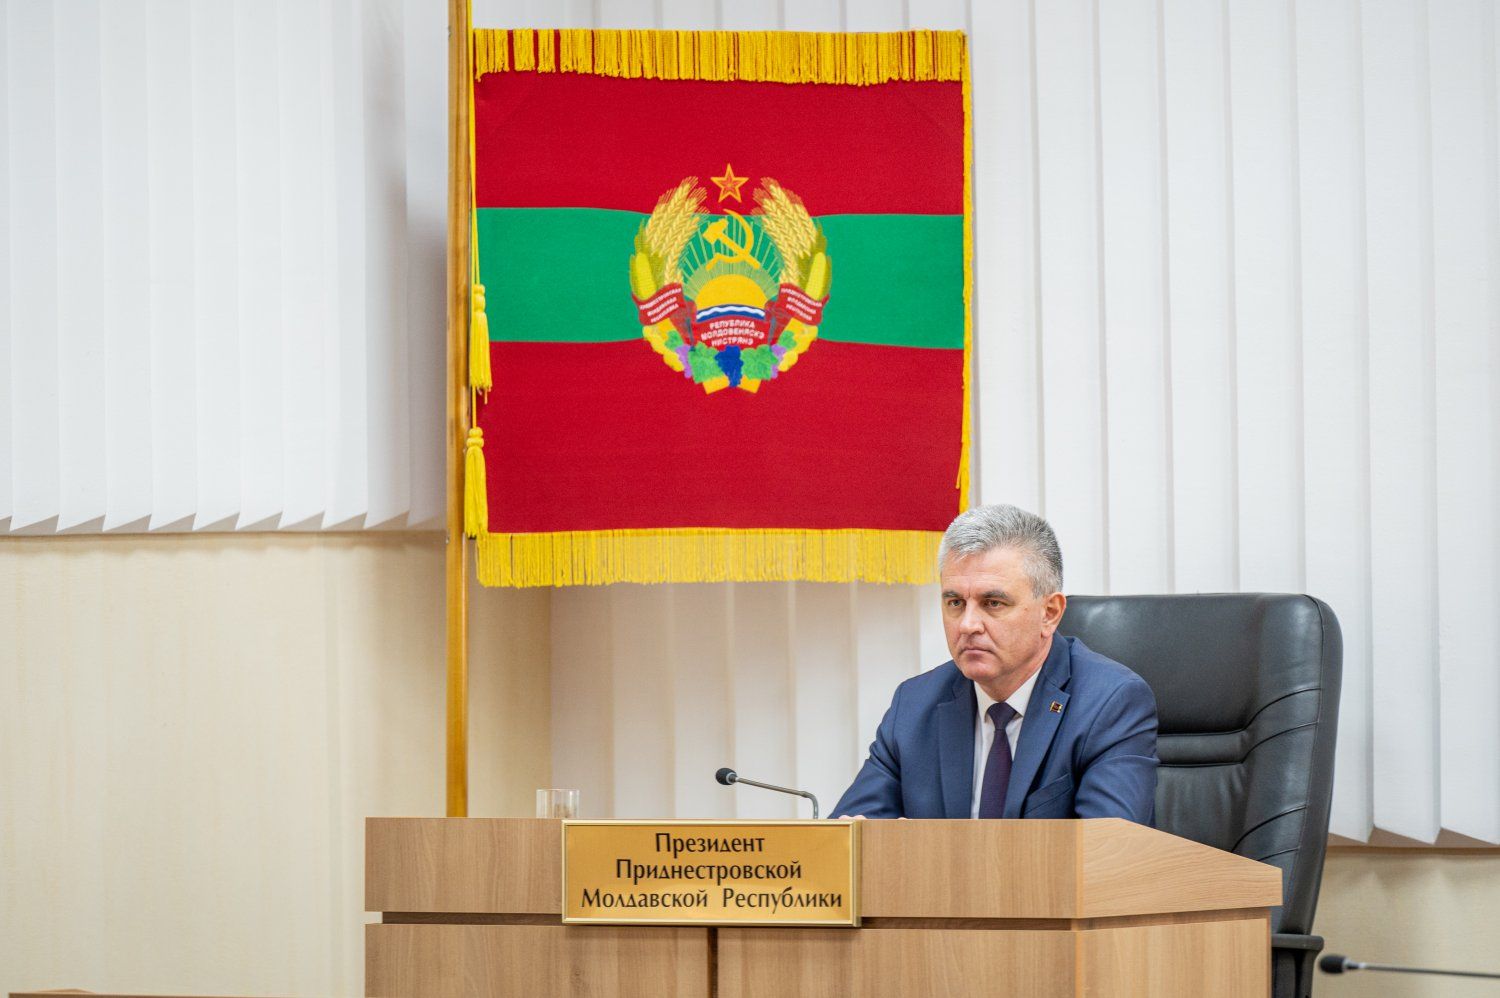 Transnistria: Fears over Possible Annexation Request to Russia